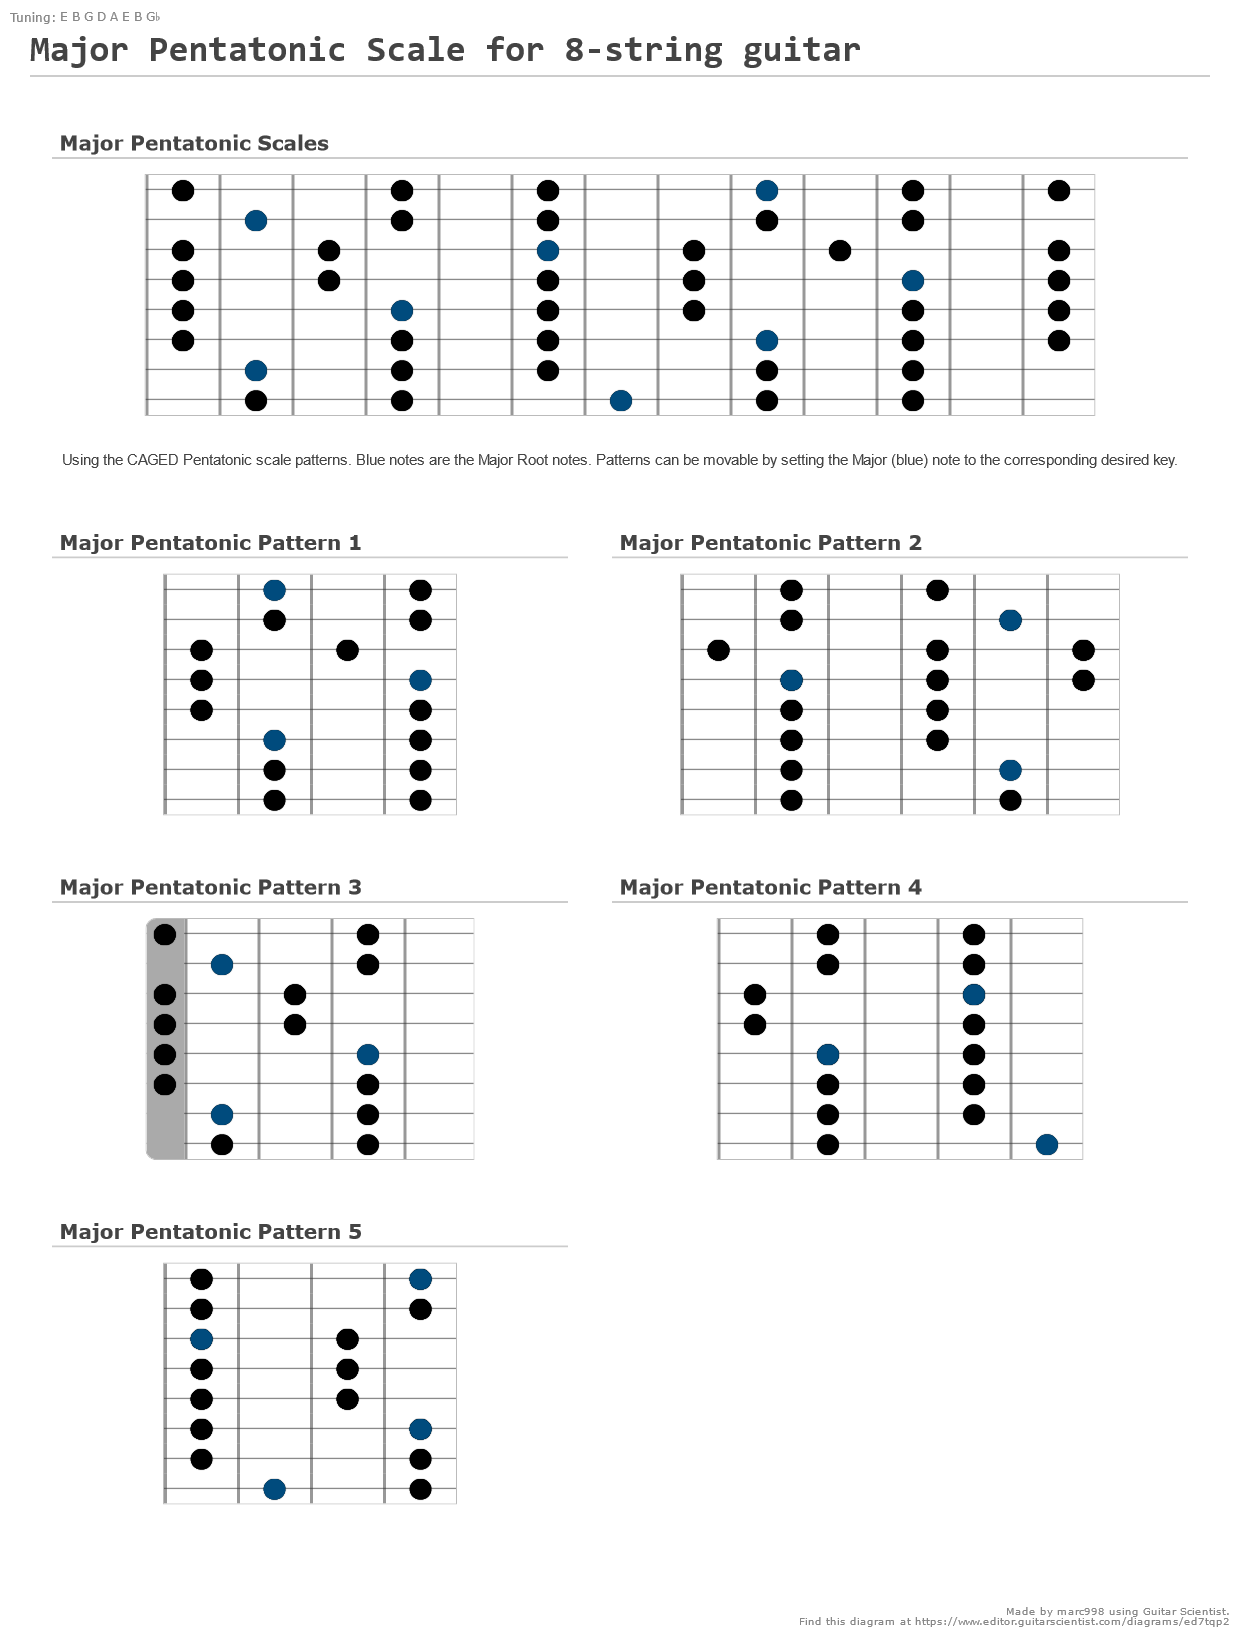 Major Pentatonic Scale A Fingering Diagram Made With Guitar Scientist